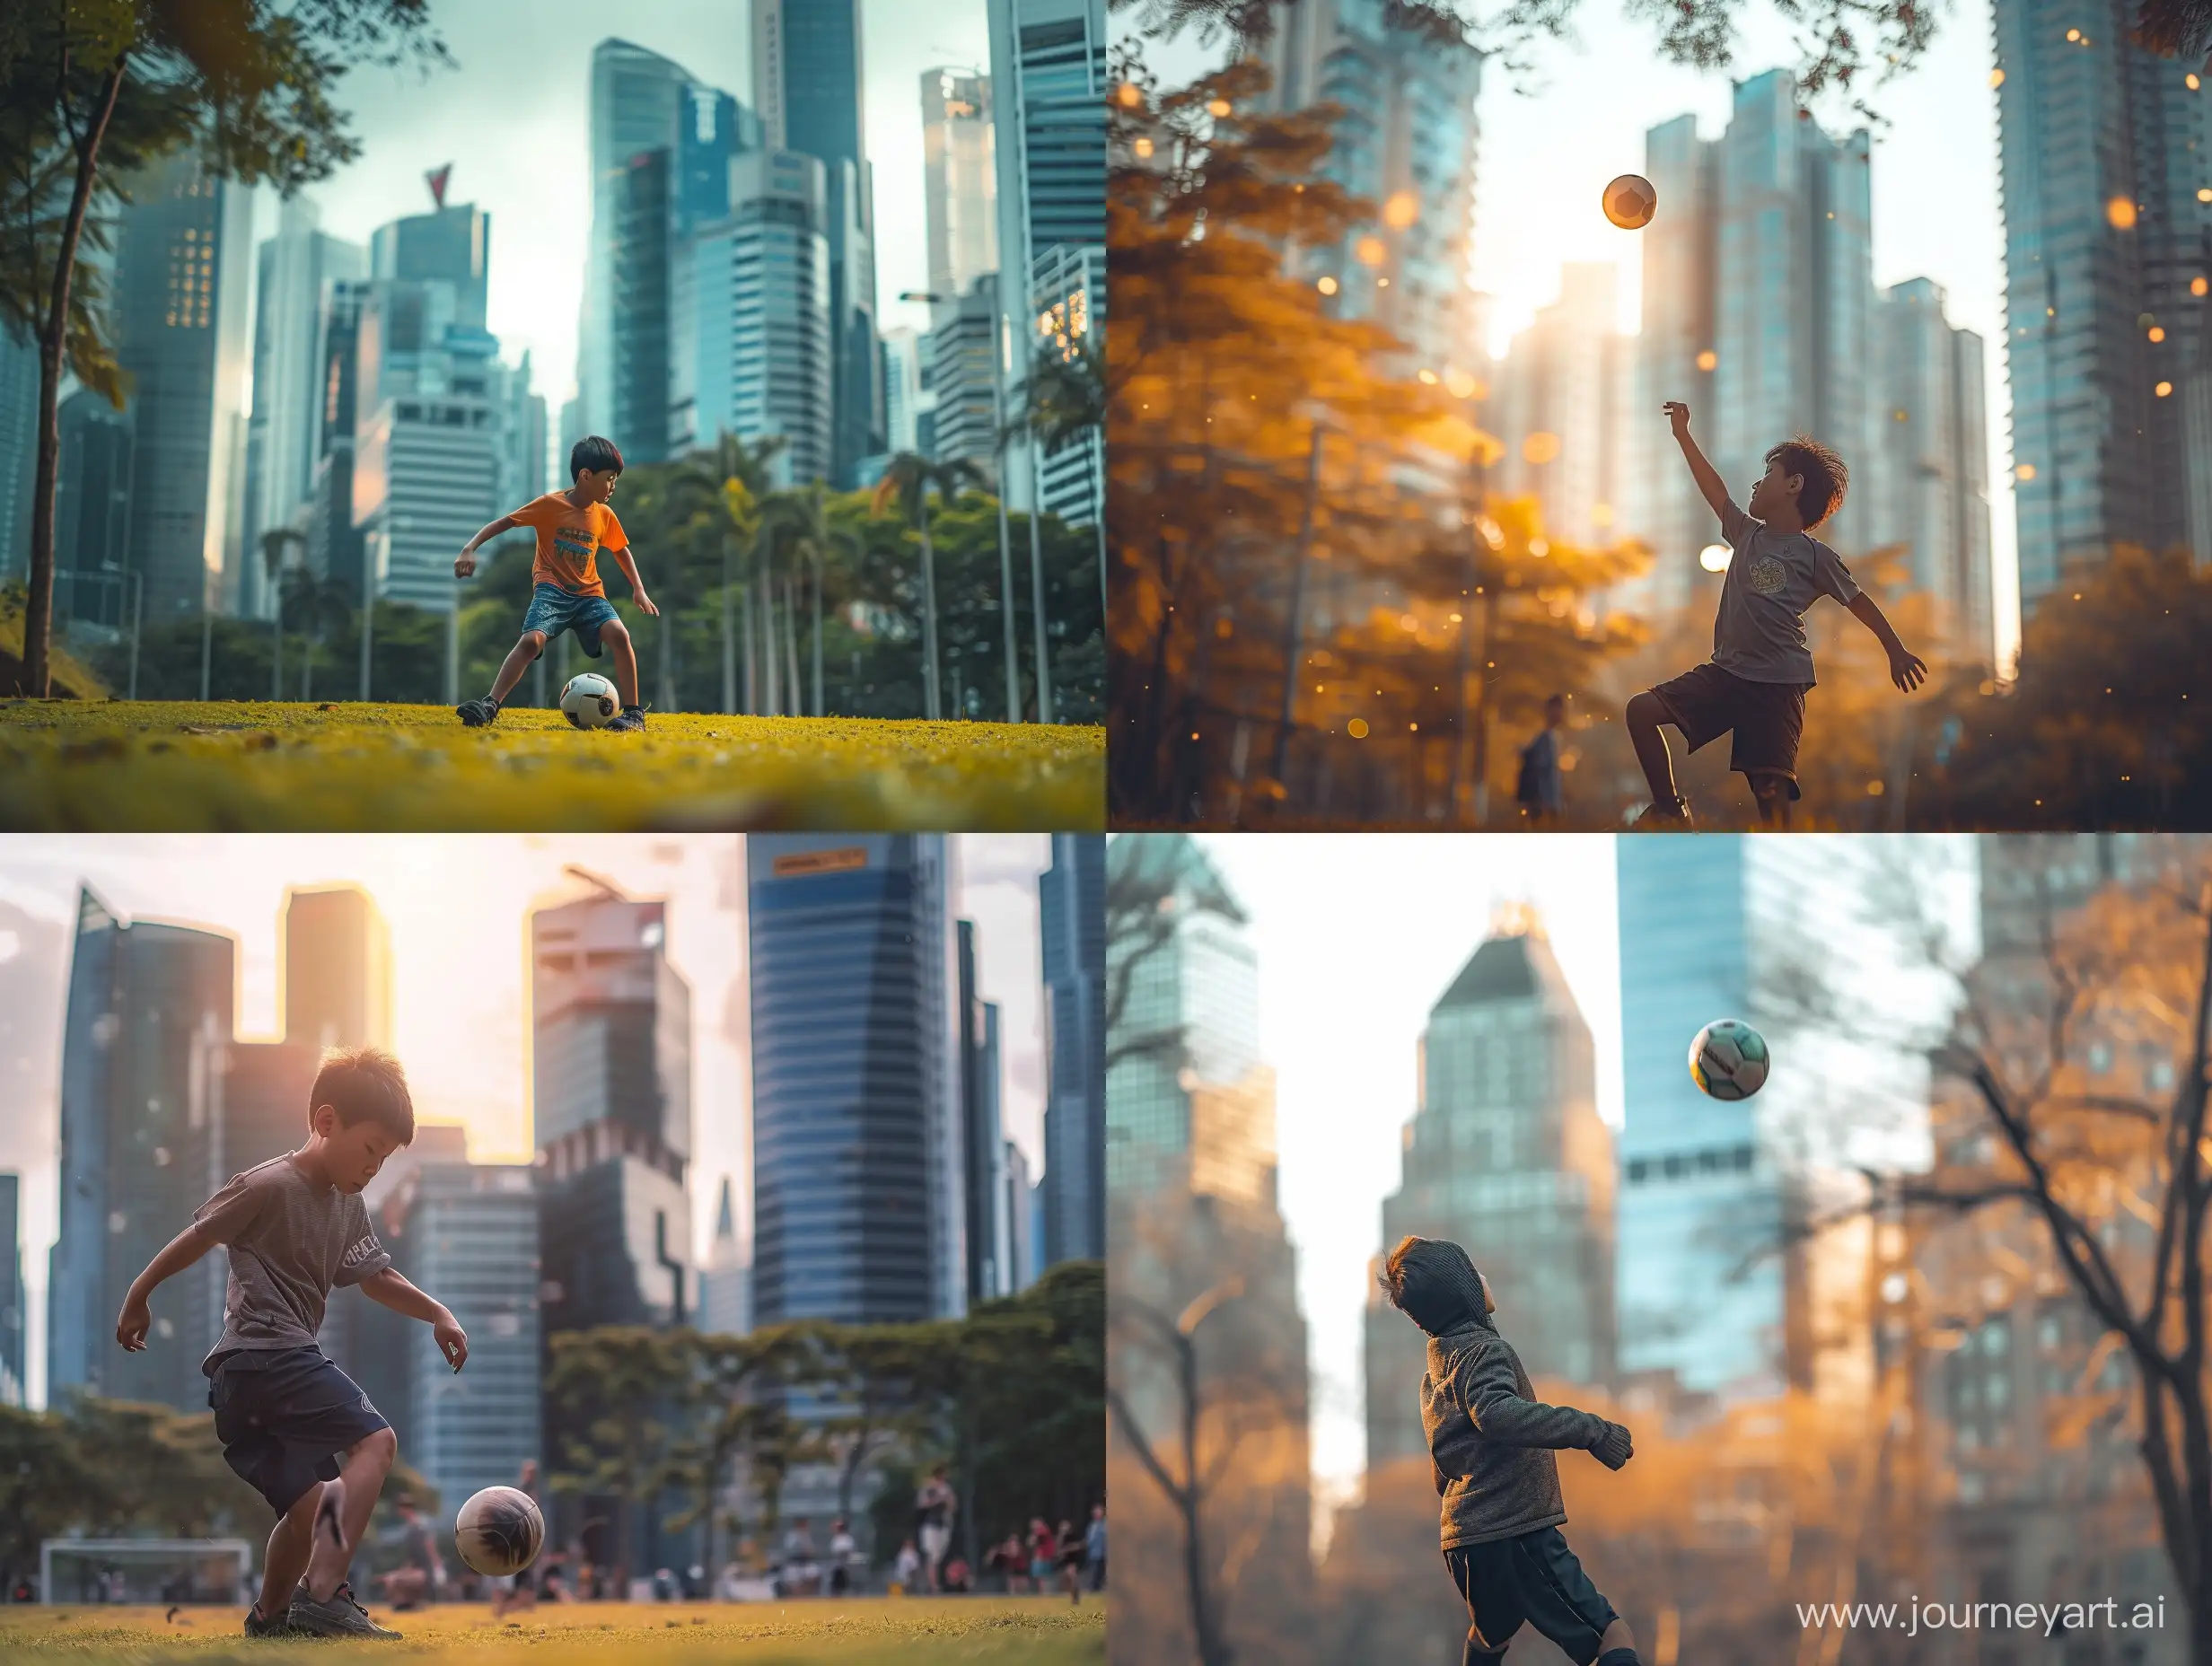 Create a realistic image of a boy playing football in an urban park. Use a Nikon D850 DSLR camera with a 200mm lens with F 1.2 aperture to isolate your subject and add a blurred skyscraper background. 